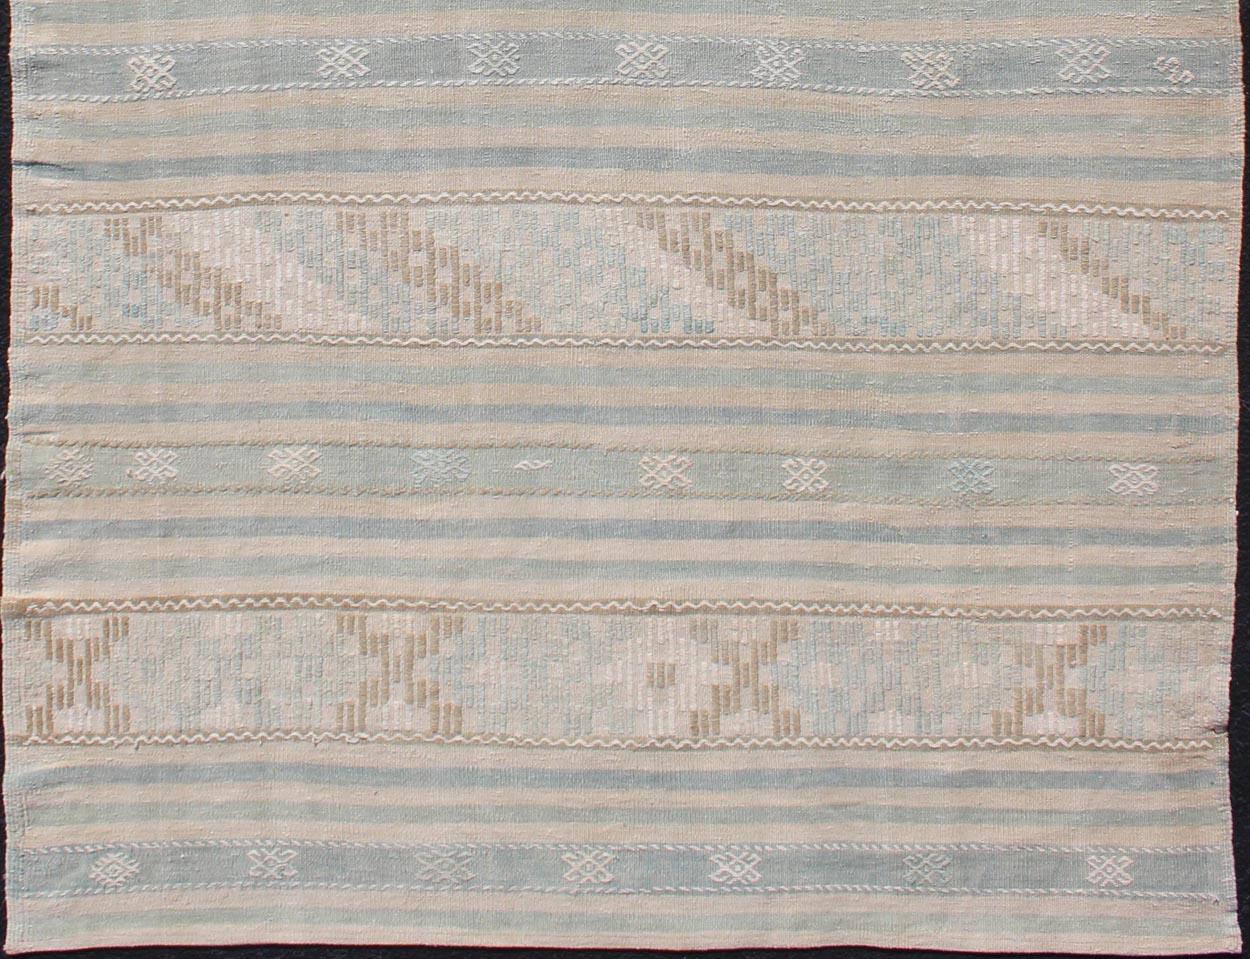 Hand-Knotted Natural-Toned Turkish Flat-Weave Kilim with Geometric Stripes Tan and Seafoam For Sale